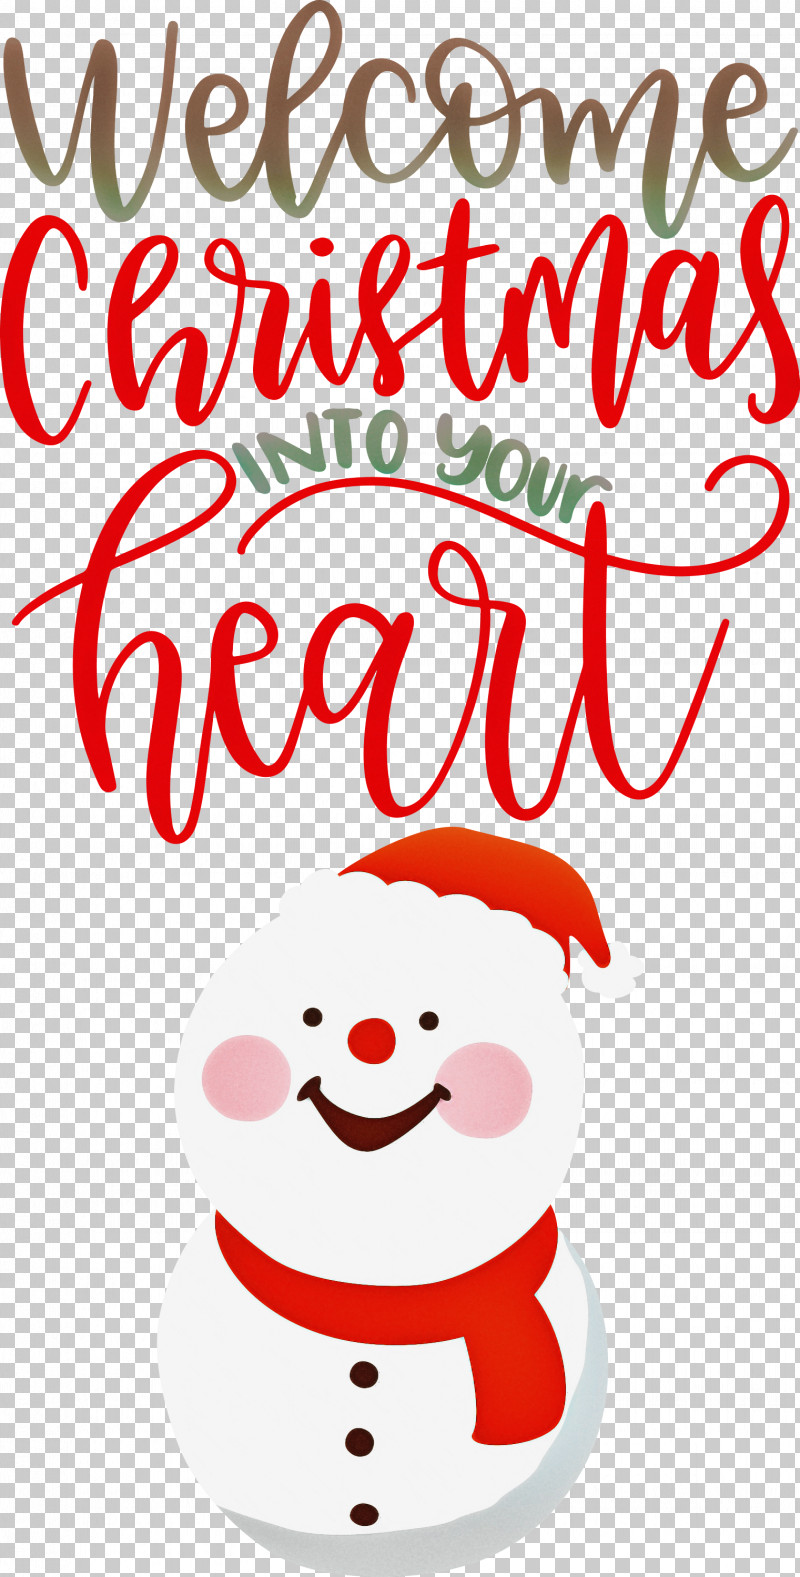 Welcome Christmas PNG, Clipart, Cartoon, Christmas Day, Christmas Ornament, Christmas Ornament M, Happiness Free PNG Download